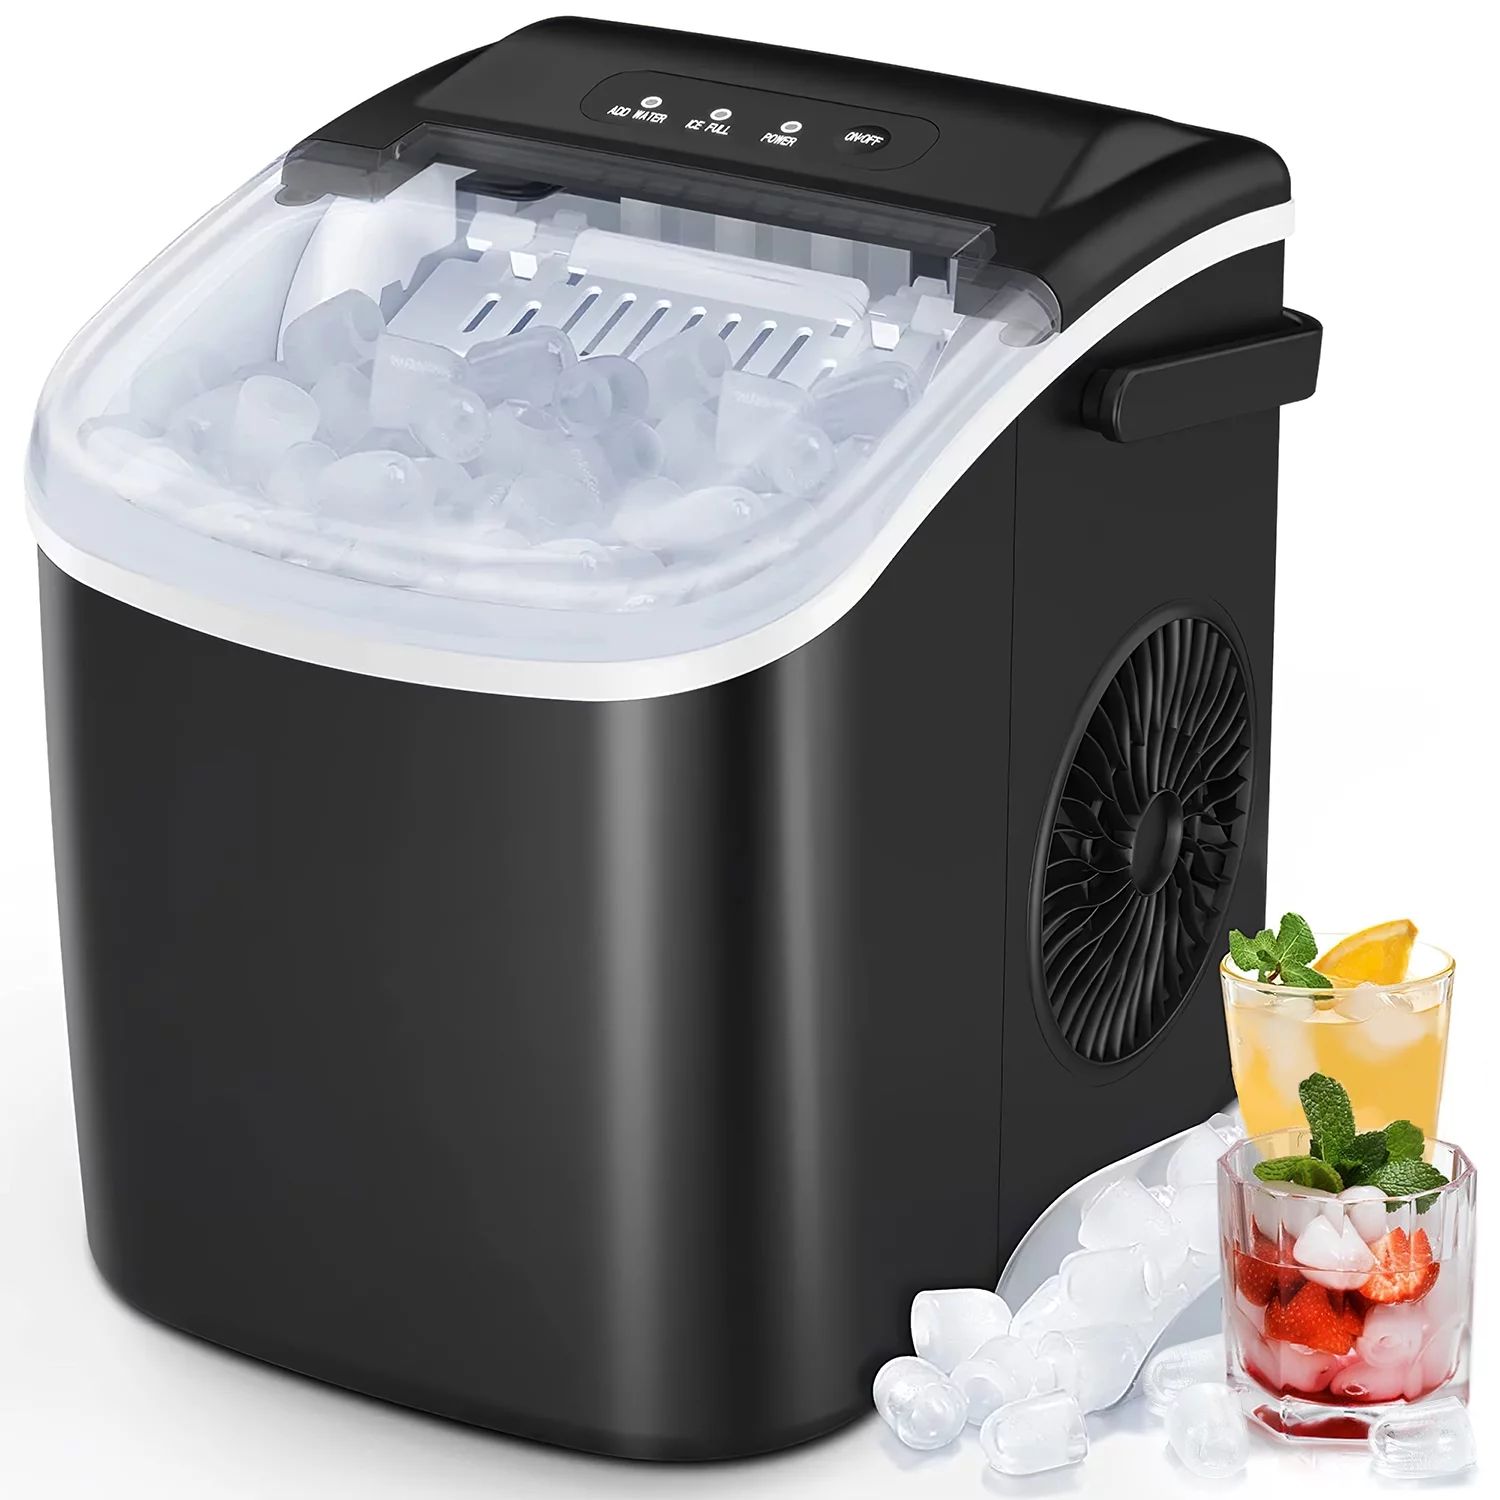 KISSAIR Countertop Ice Maker, Self-Cleaning Portable Ice Maker Machine with Handle, 9 Bullet-Shap... | Walmart (US)